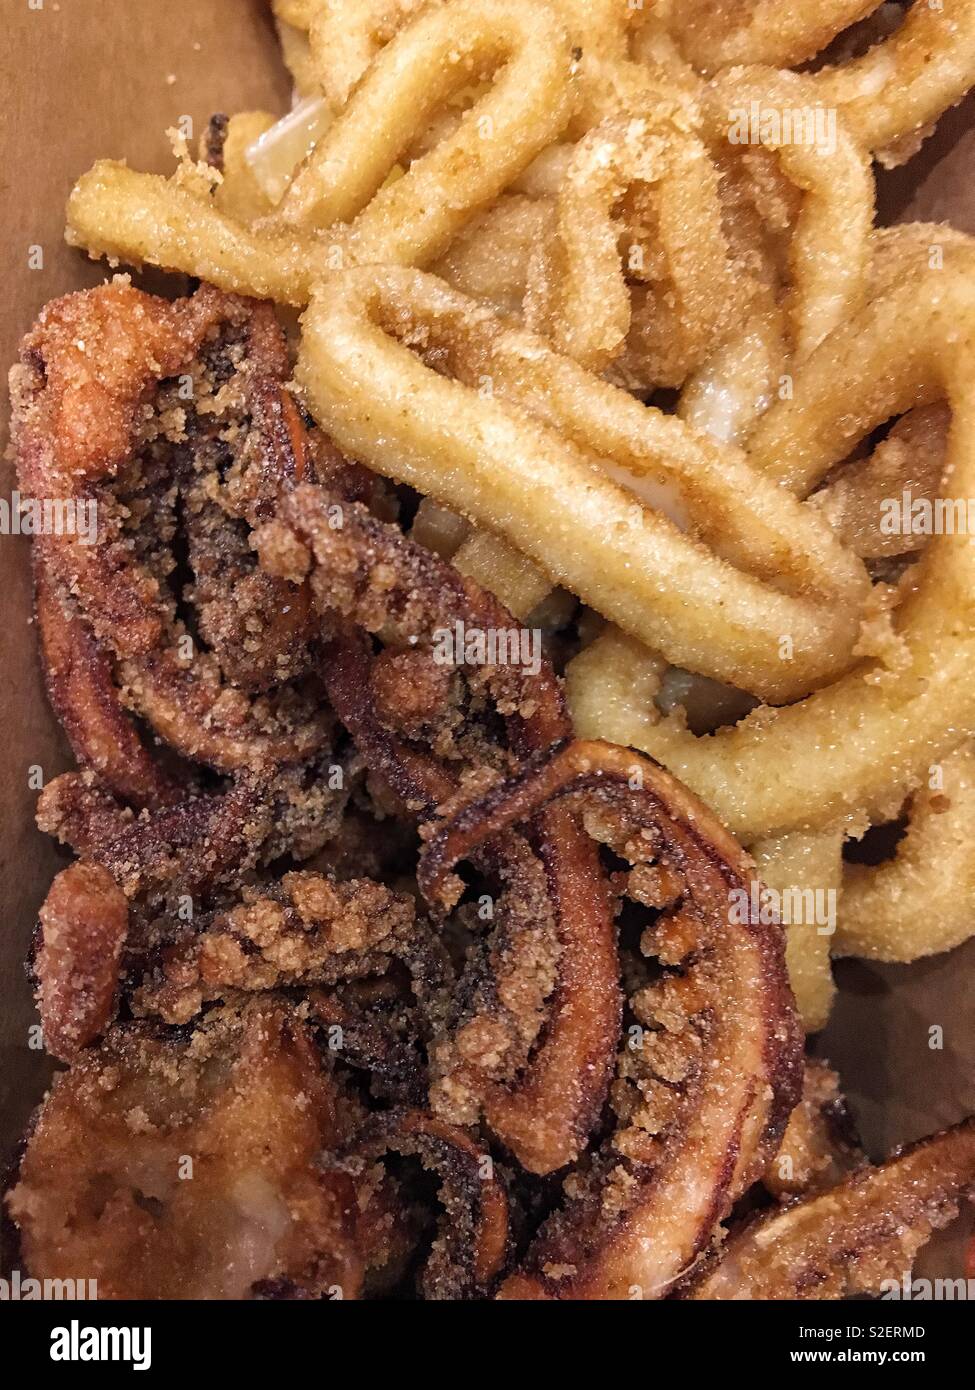 Fried Octopus and Squid Stock Photo